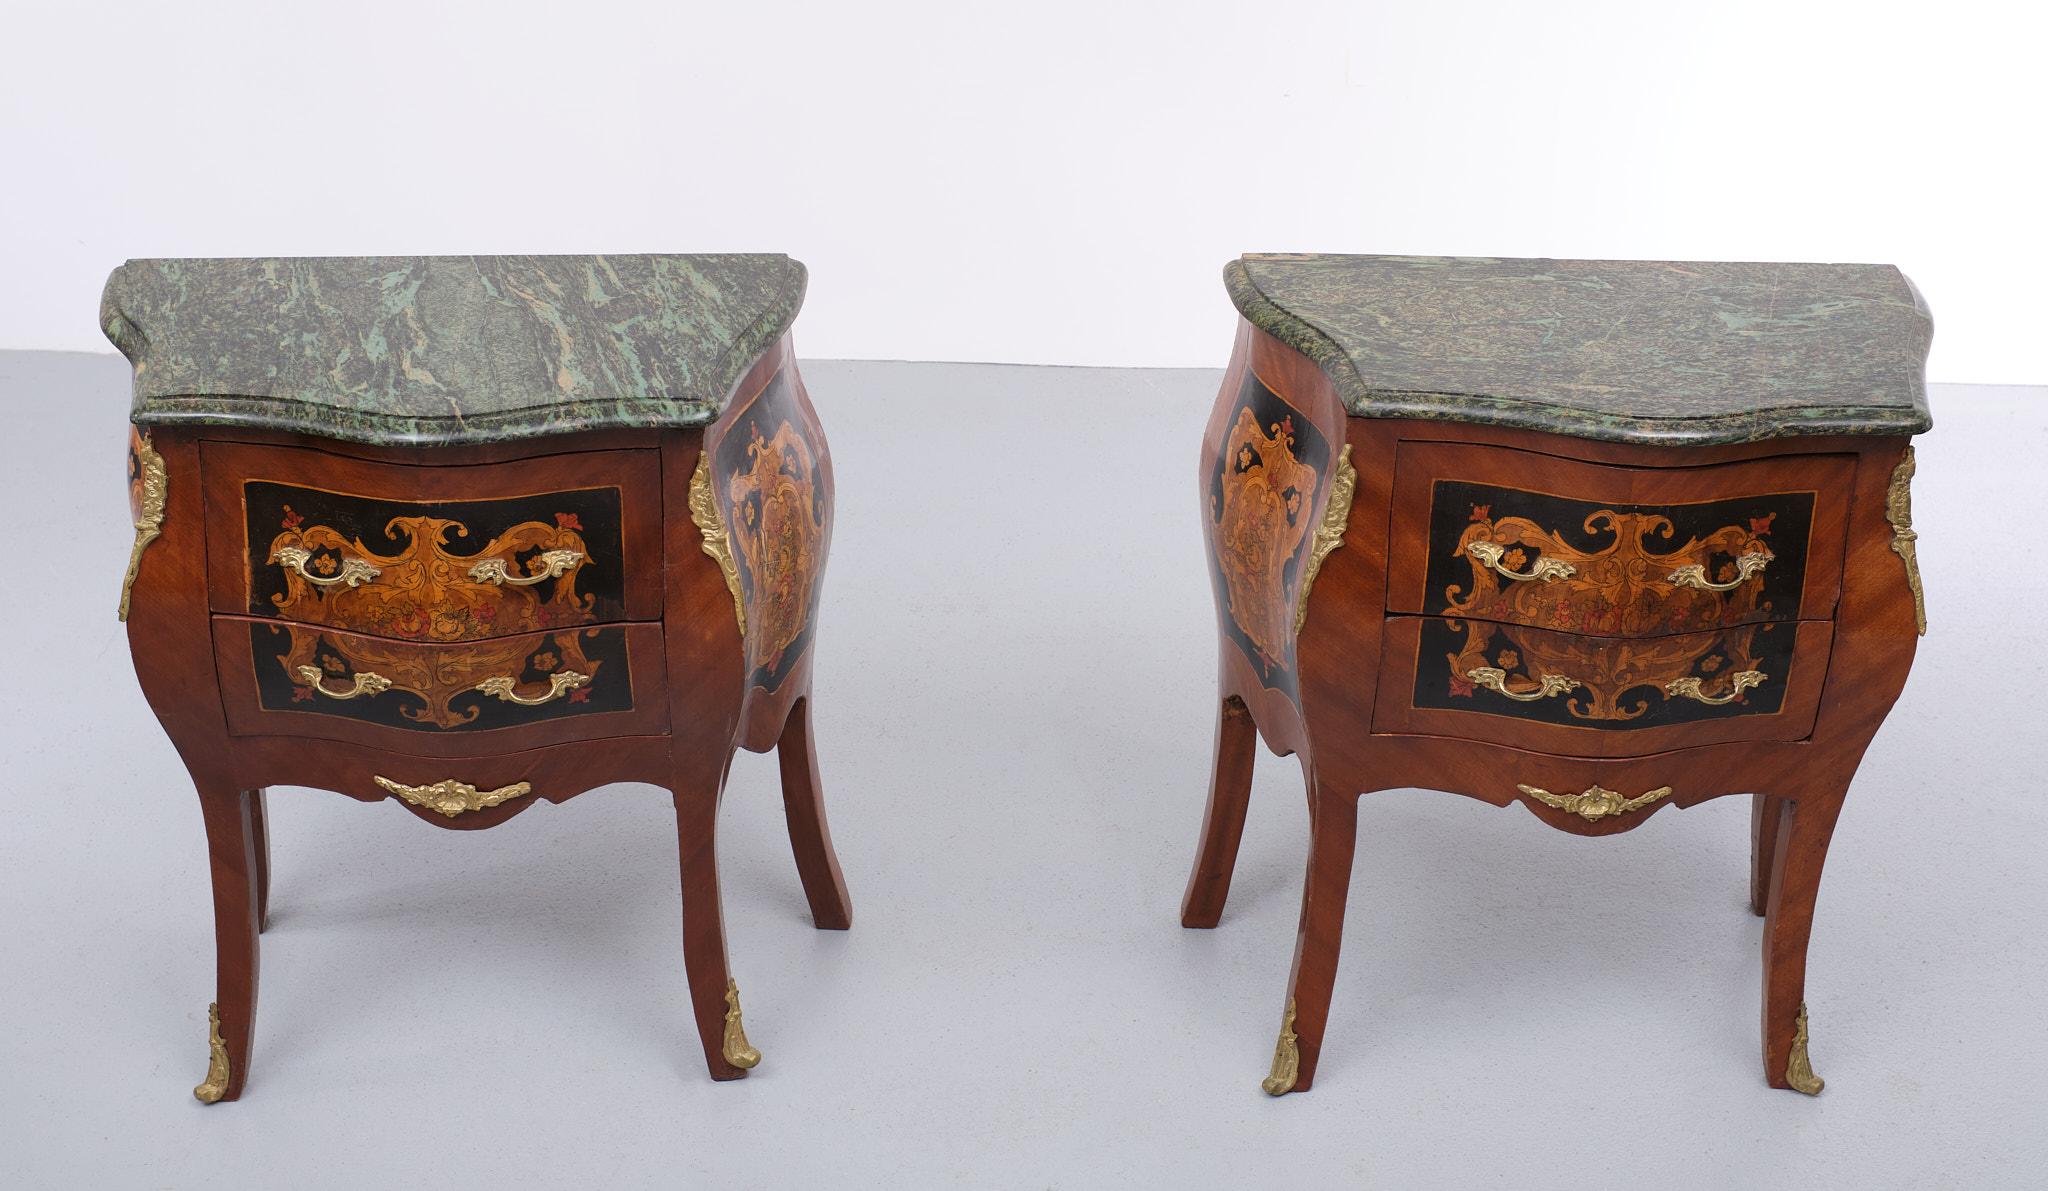 For sale two very nice decorative nightstands. Italian inlay wood, comes with marble 
curved Greenish color tops. Bronze handles and details. Two drawers each.